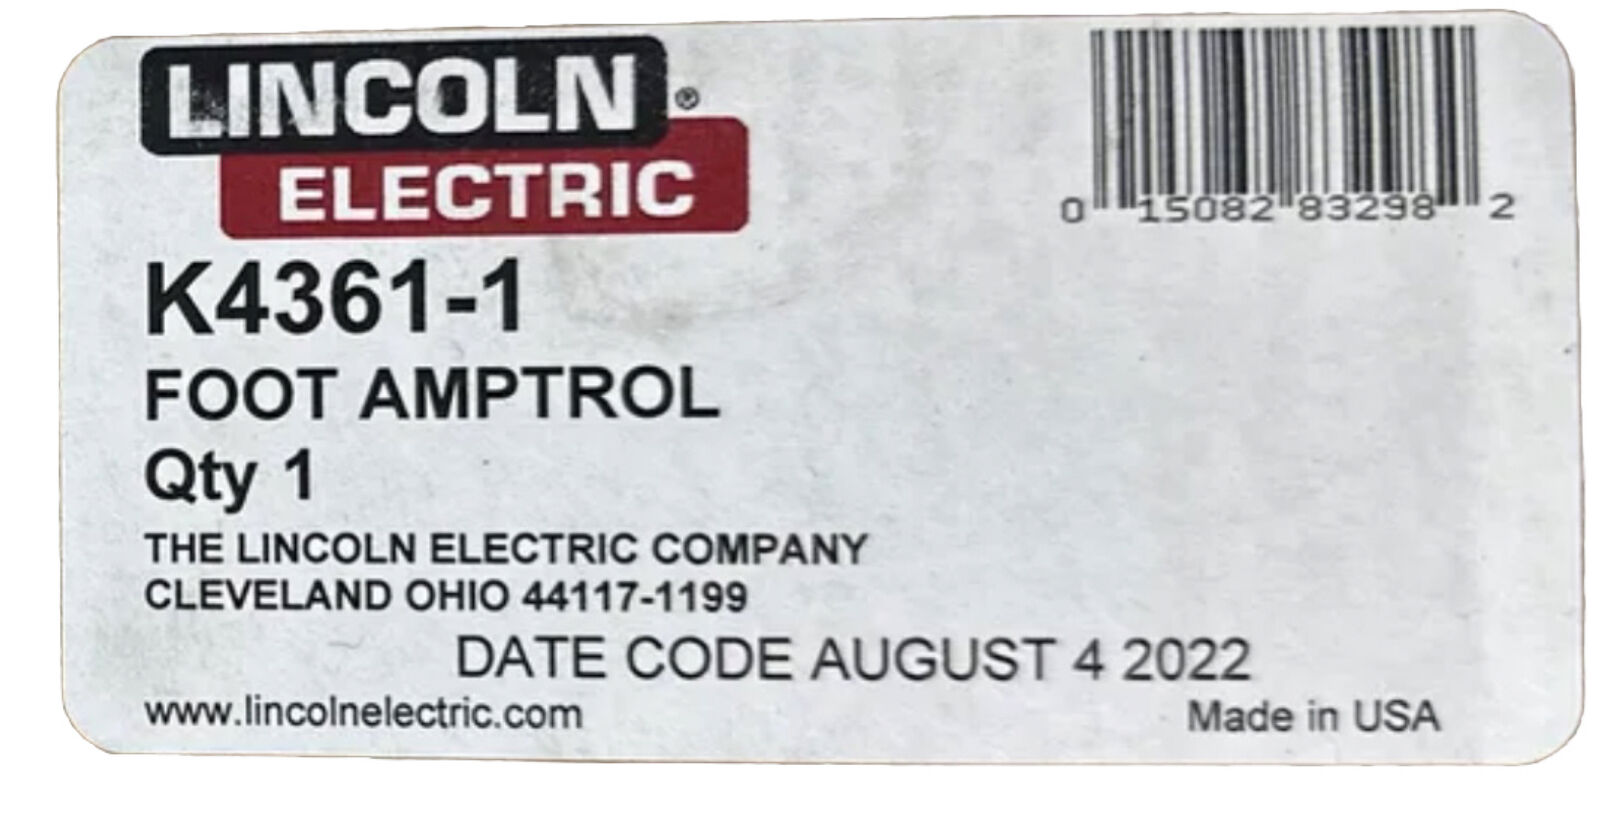 Lincoln Electric K4361-1 Foot Amptrol Pedal.